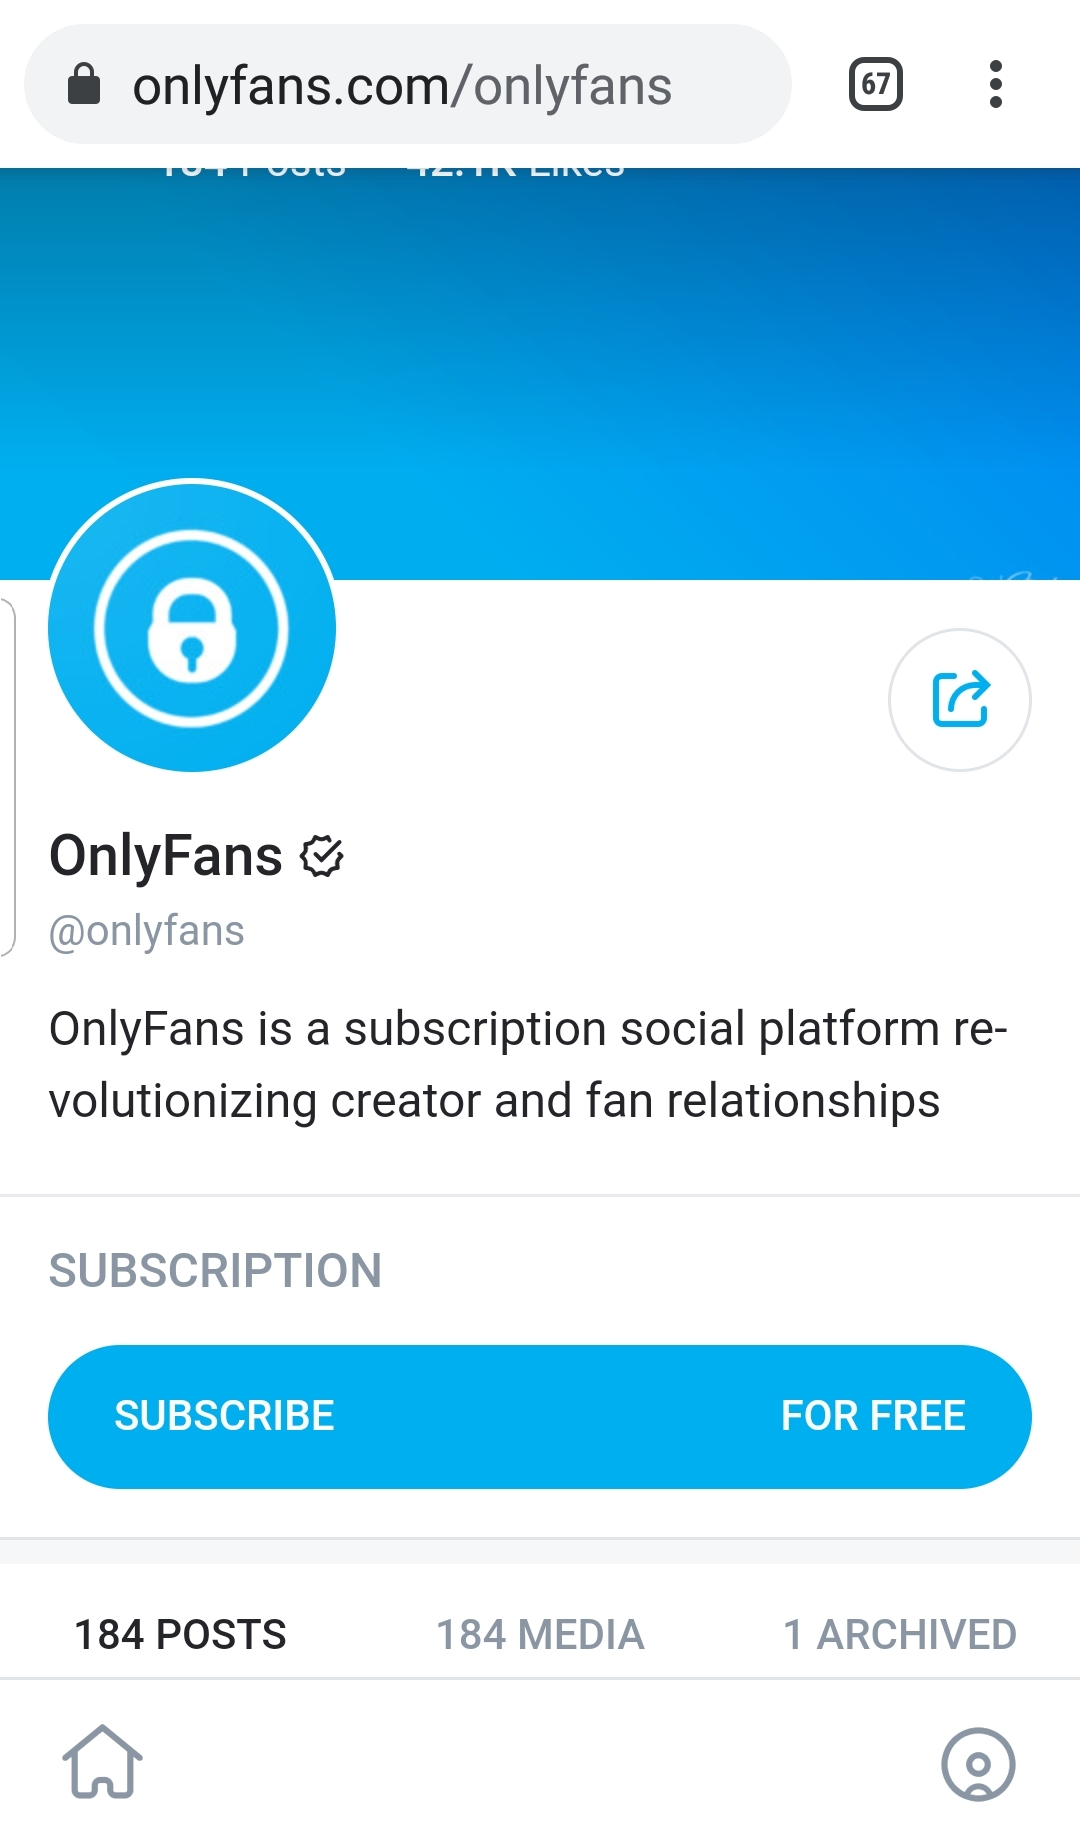 How To Unsubscribe From A Free Onlyfans